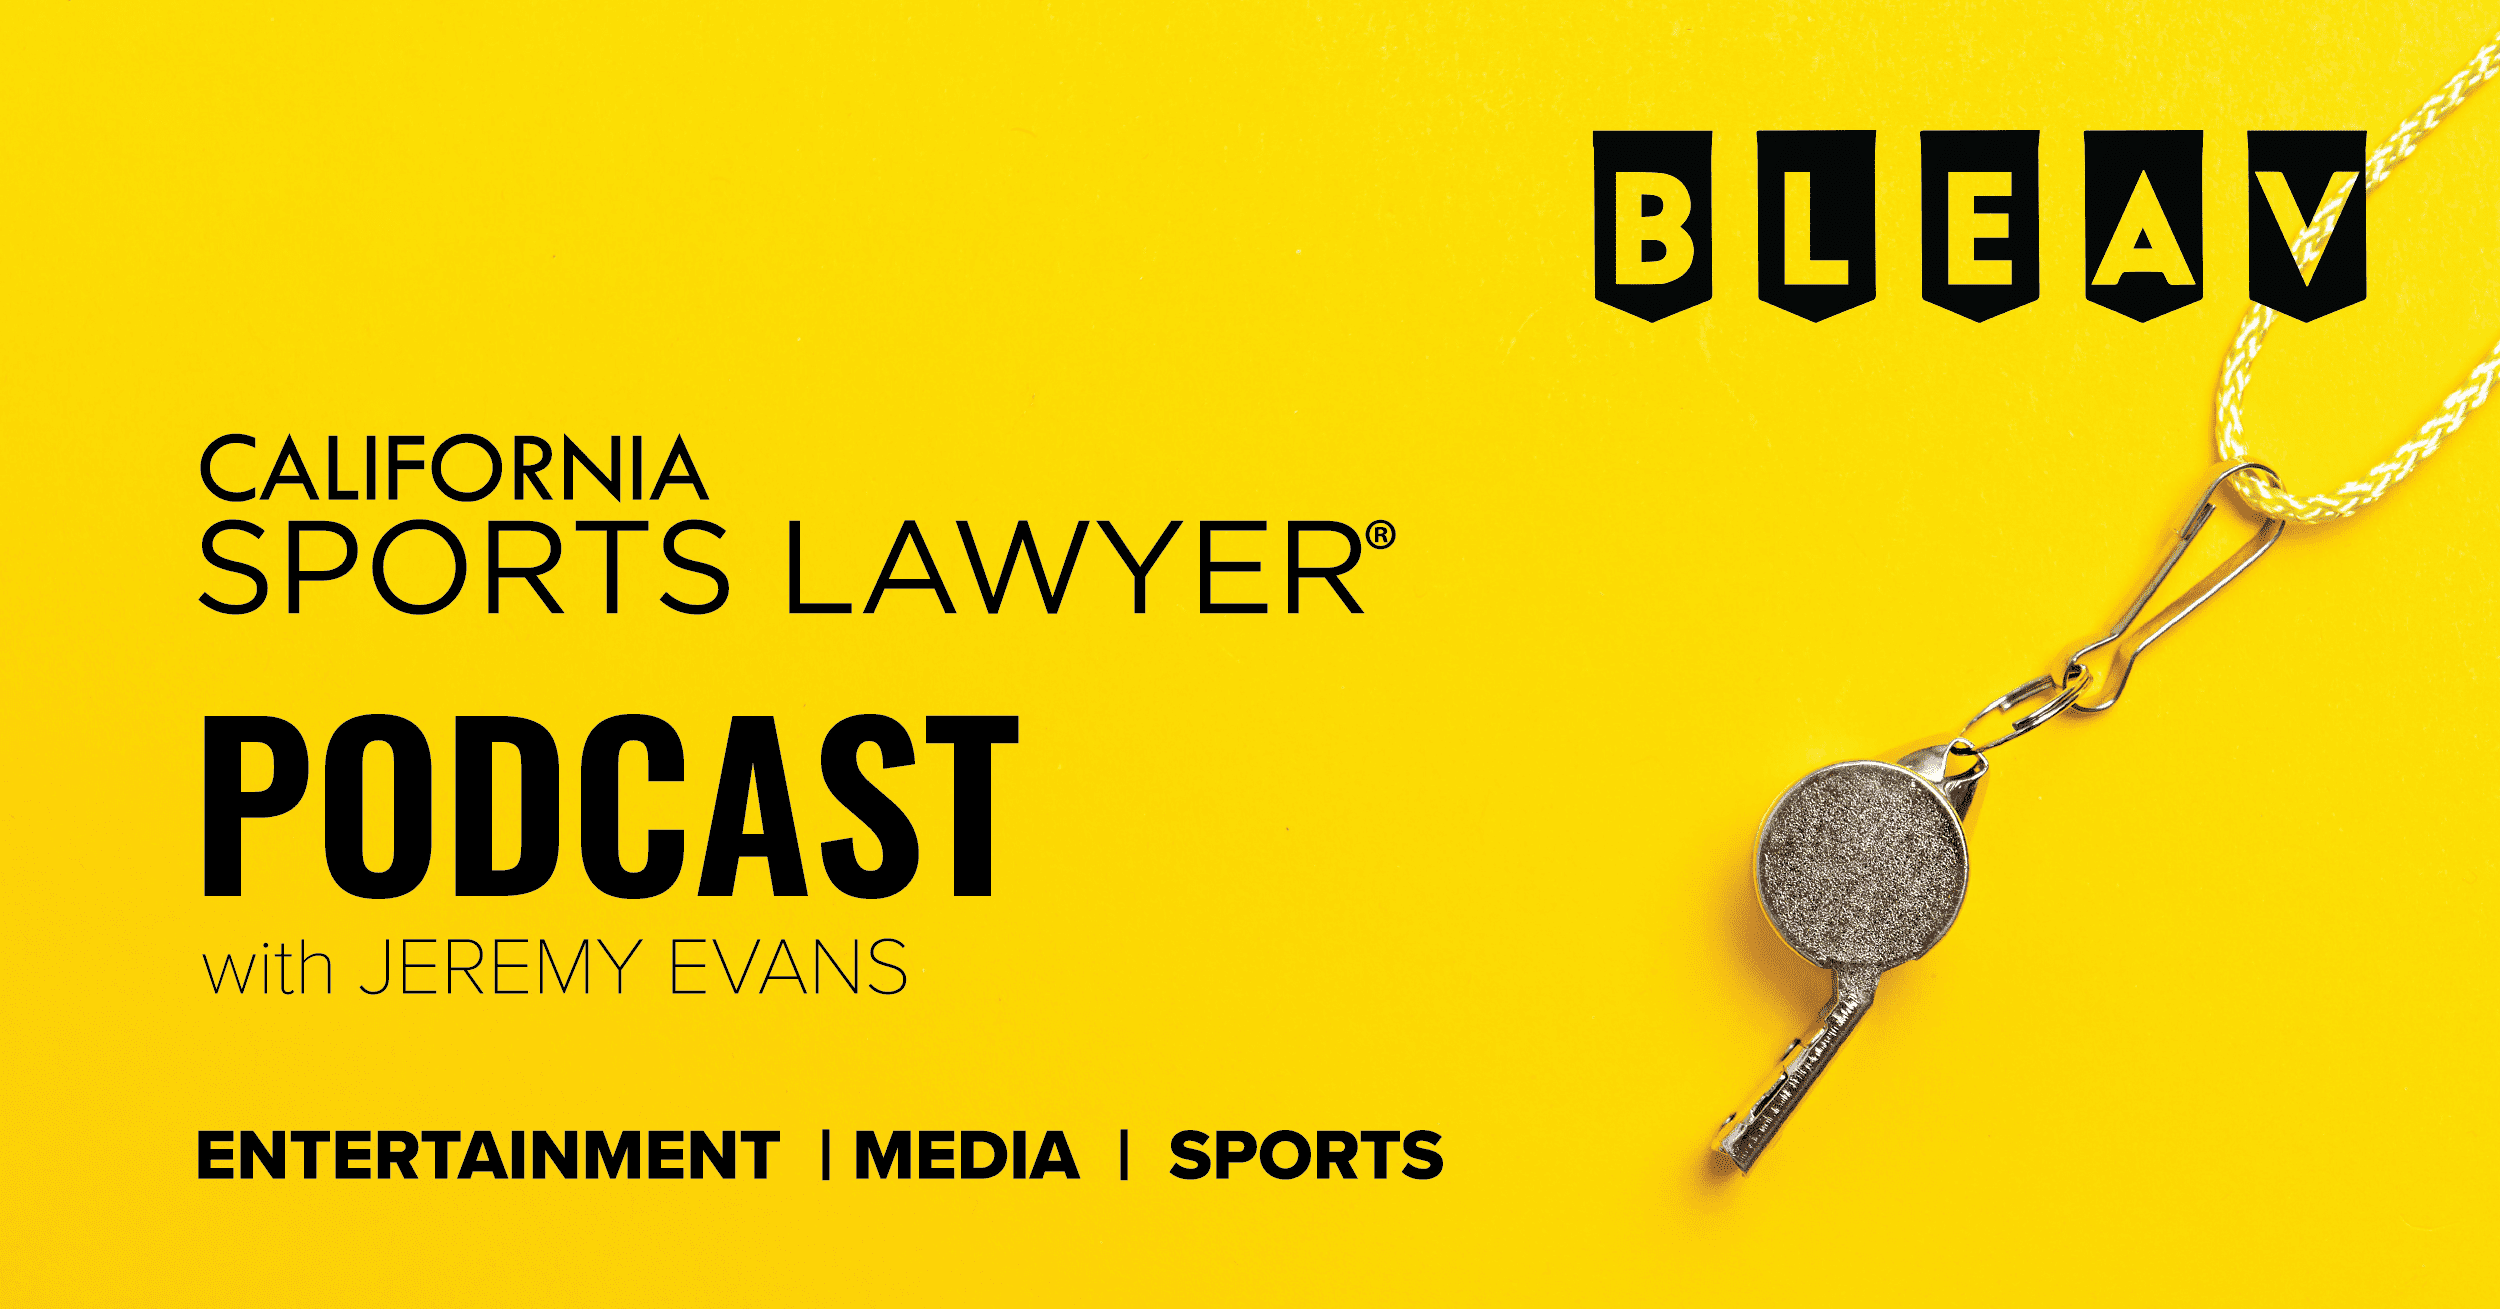 California Sports Lawyer® Podcast with Jeremy Evans: Creativity and Labor at the Heart of AI Battle in Hollywood